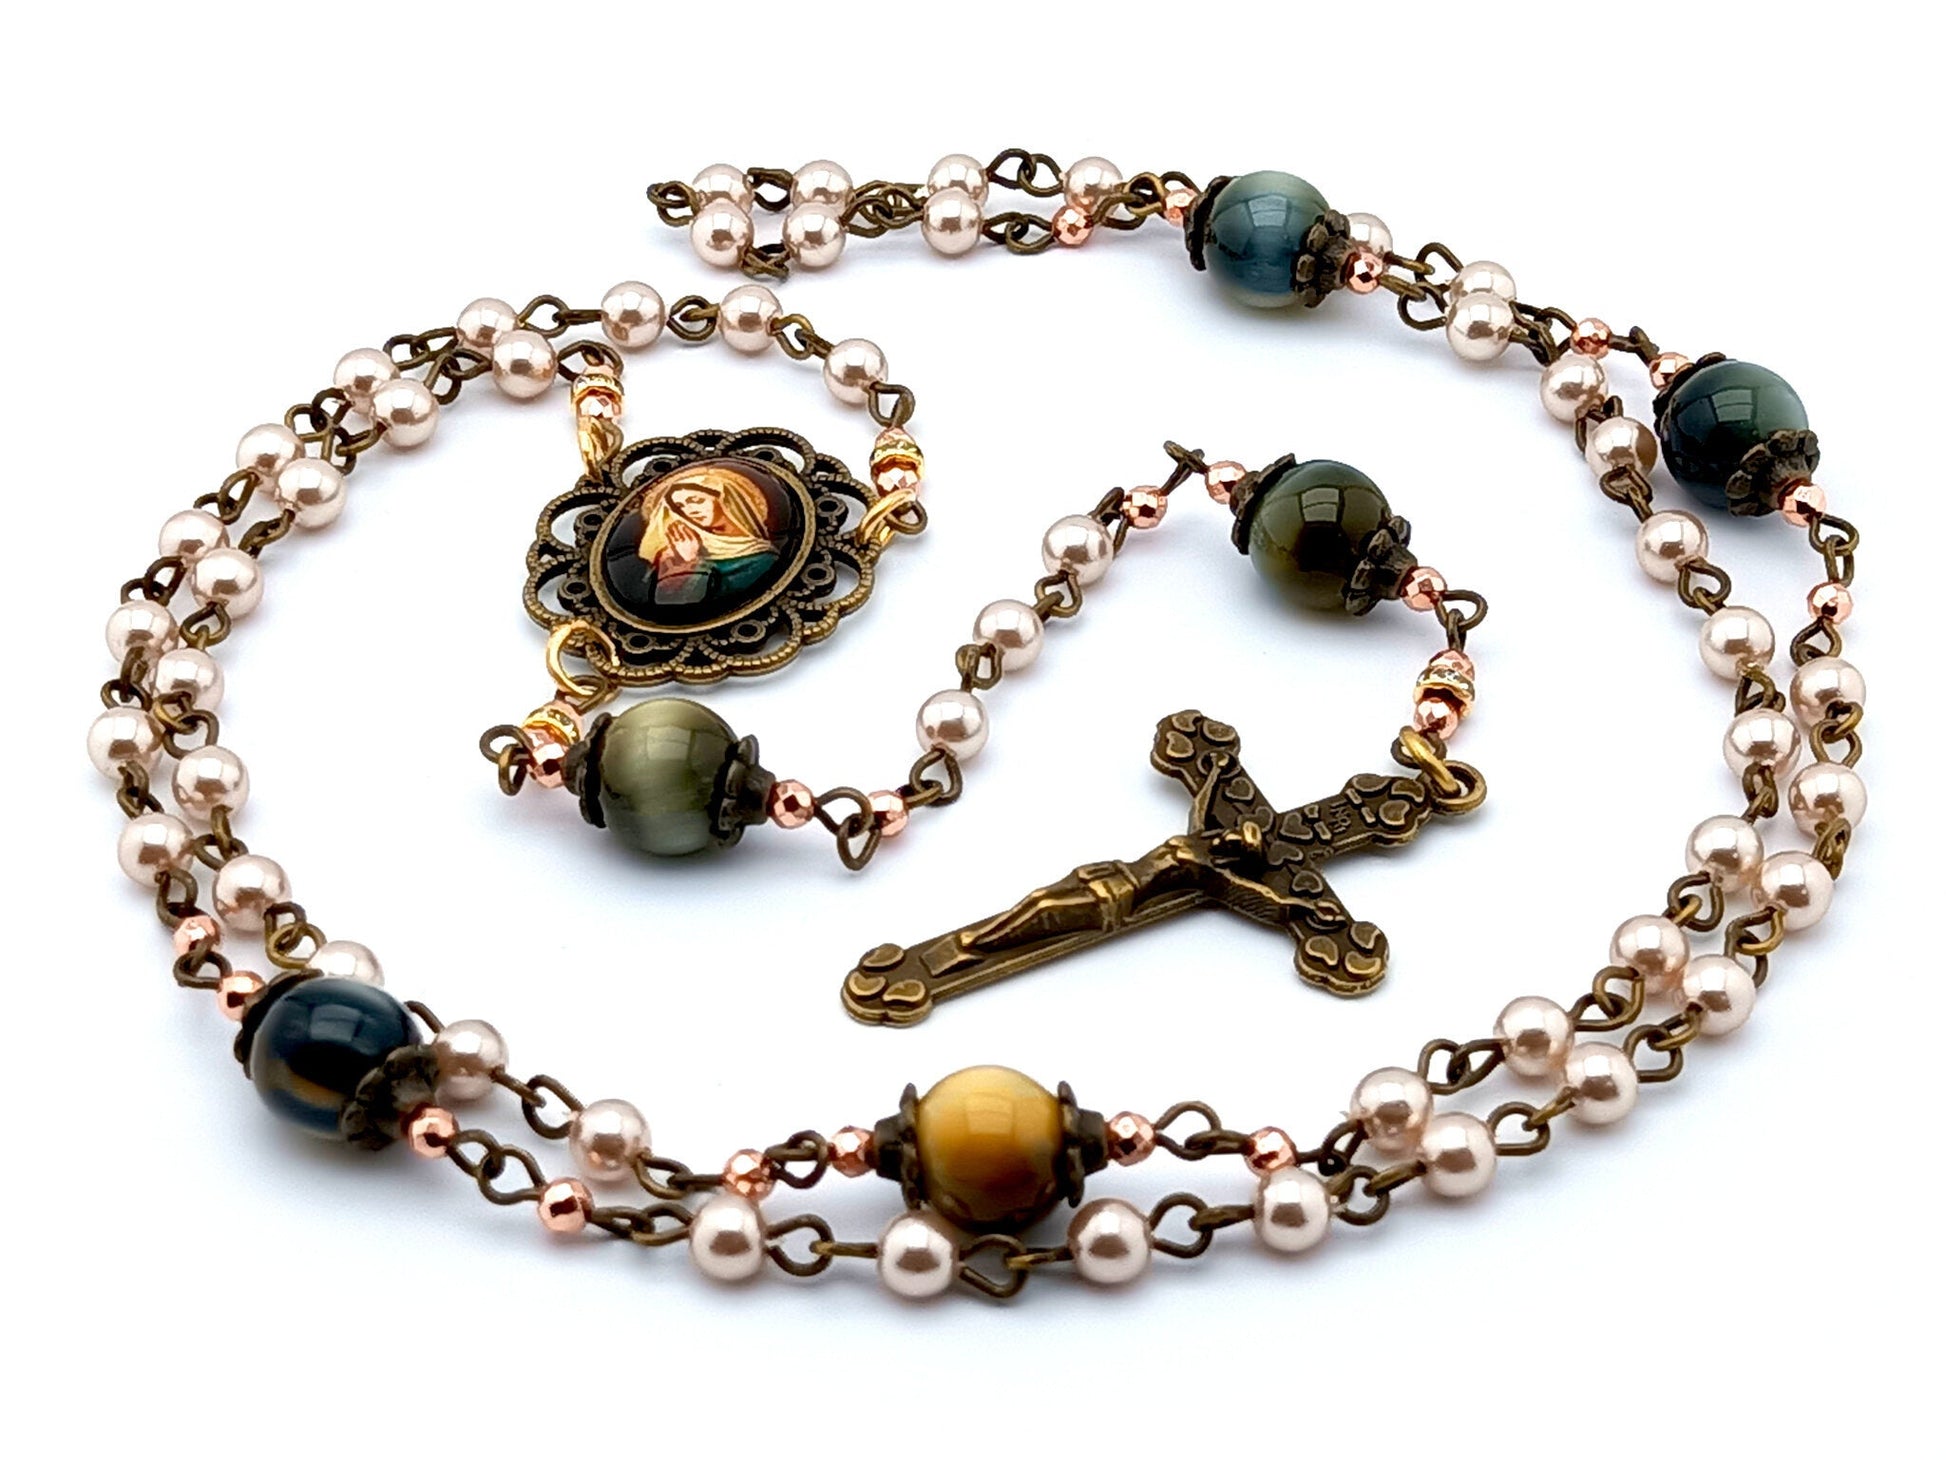 Blessed Virgin Mary unique rosary beads with pearl and tigers eye gemstone beads, bronze crucifix and picture centre medal.